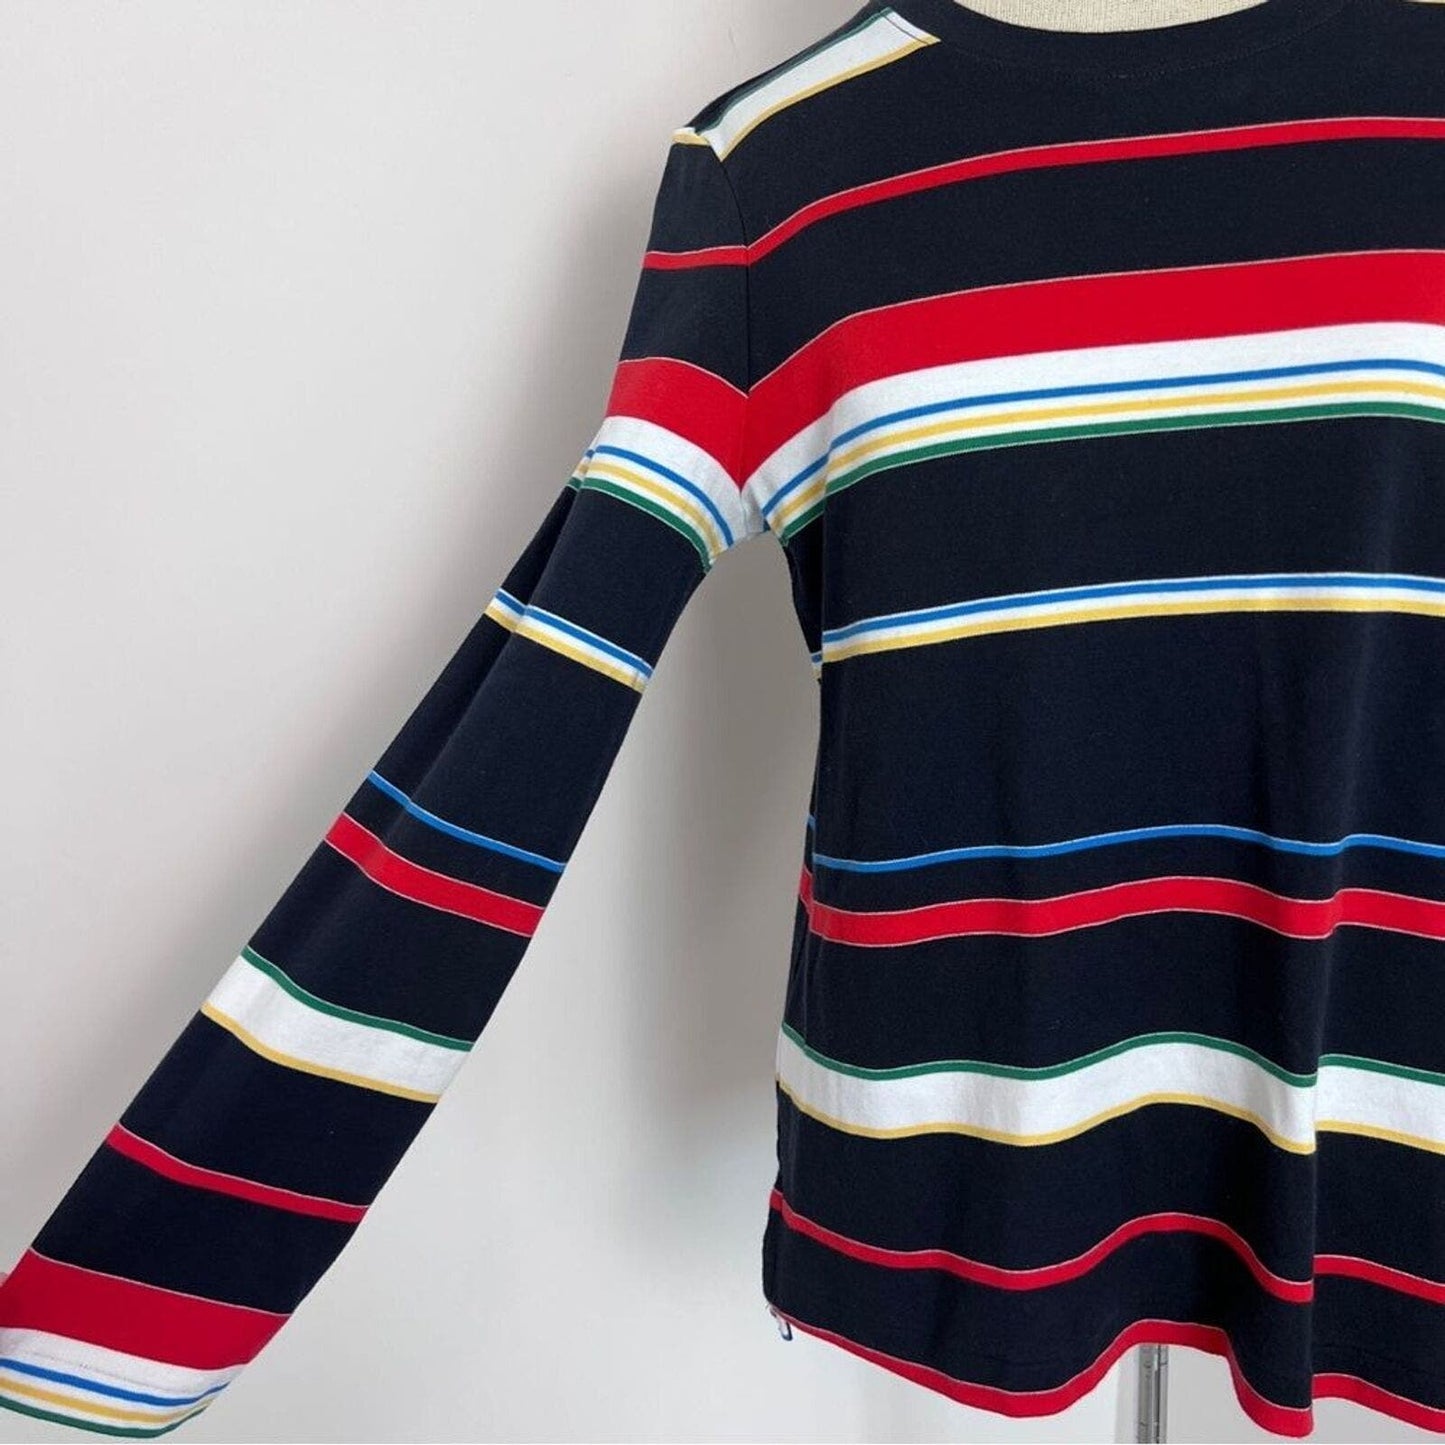 Brooks Brothers Stripes Long Sleeve Thin Sweater size M (350)